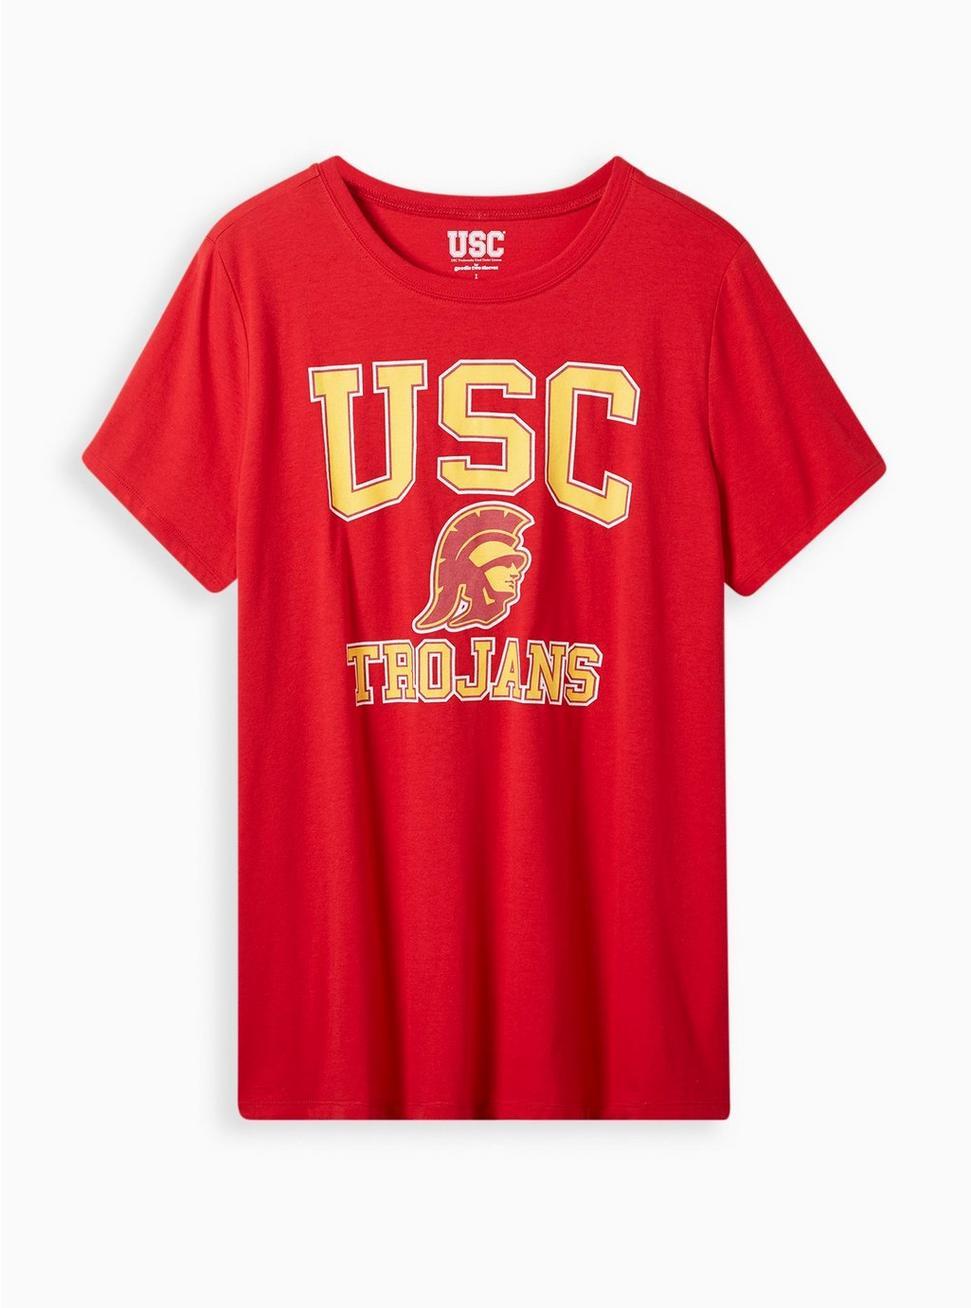 USC Trojans Classic Fit Cotton Crew Neck Tee, JESTER RED, hi-res